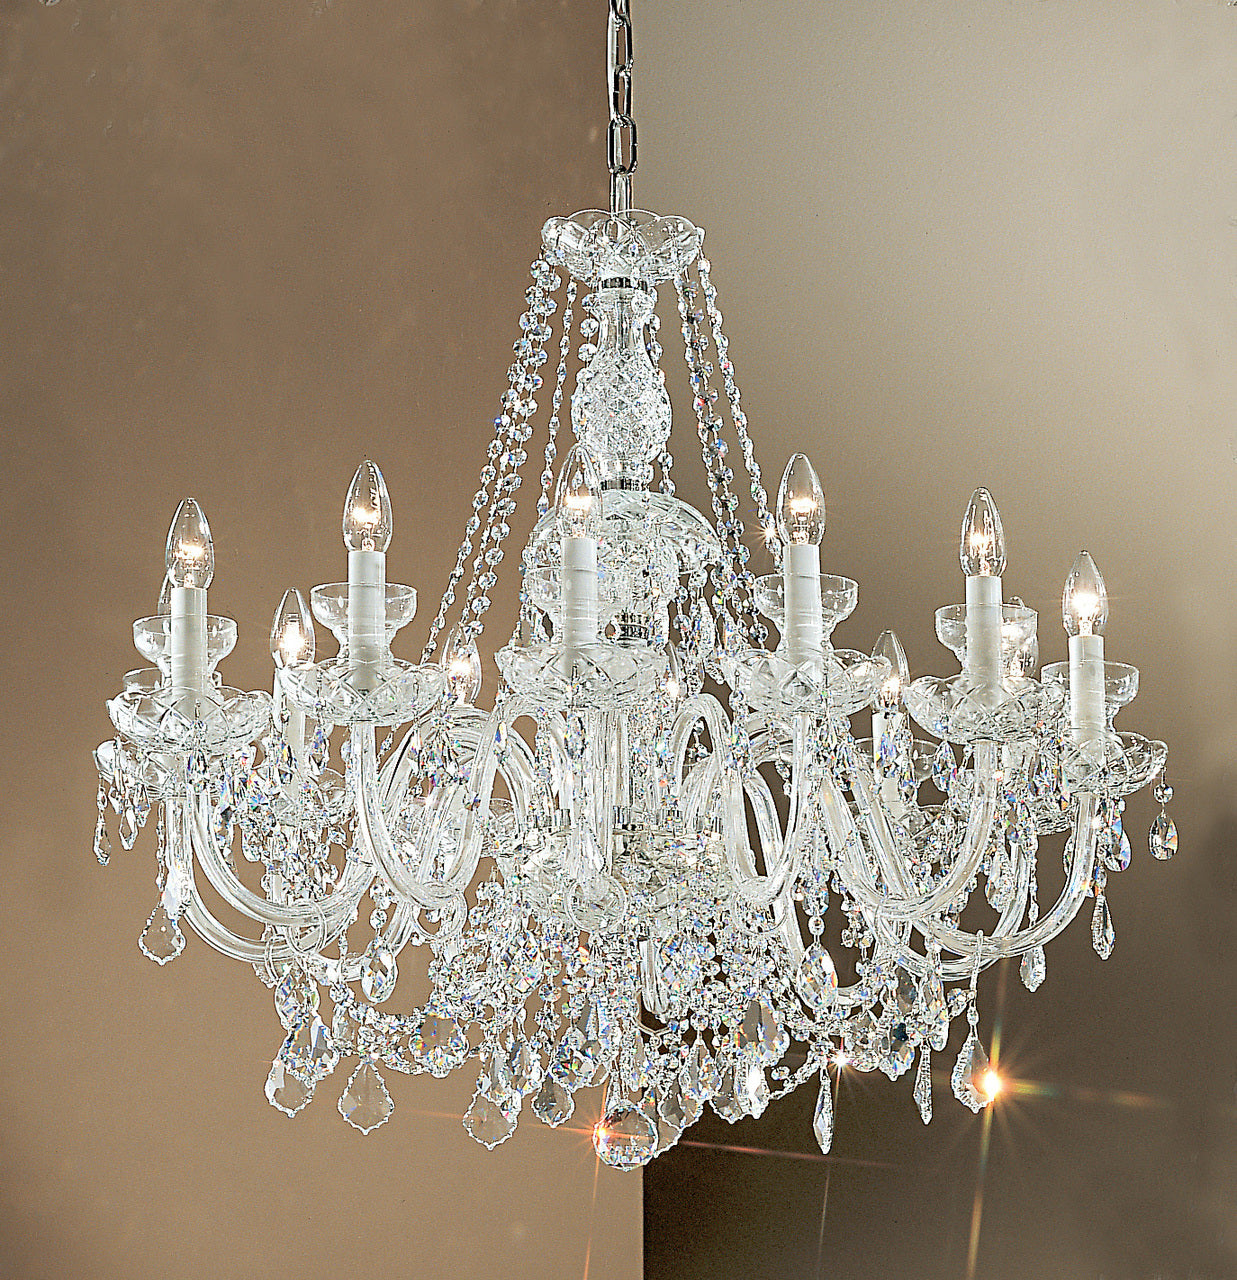 Classic Lighting 8276 G S Bohemia Crystal/Glass Chandelier in 24k Gold (Imported from Italy)